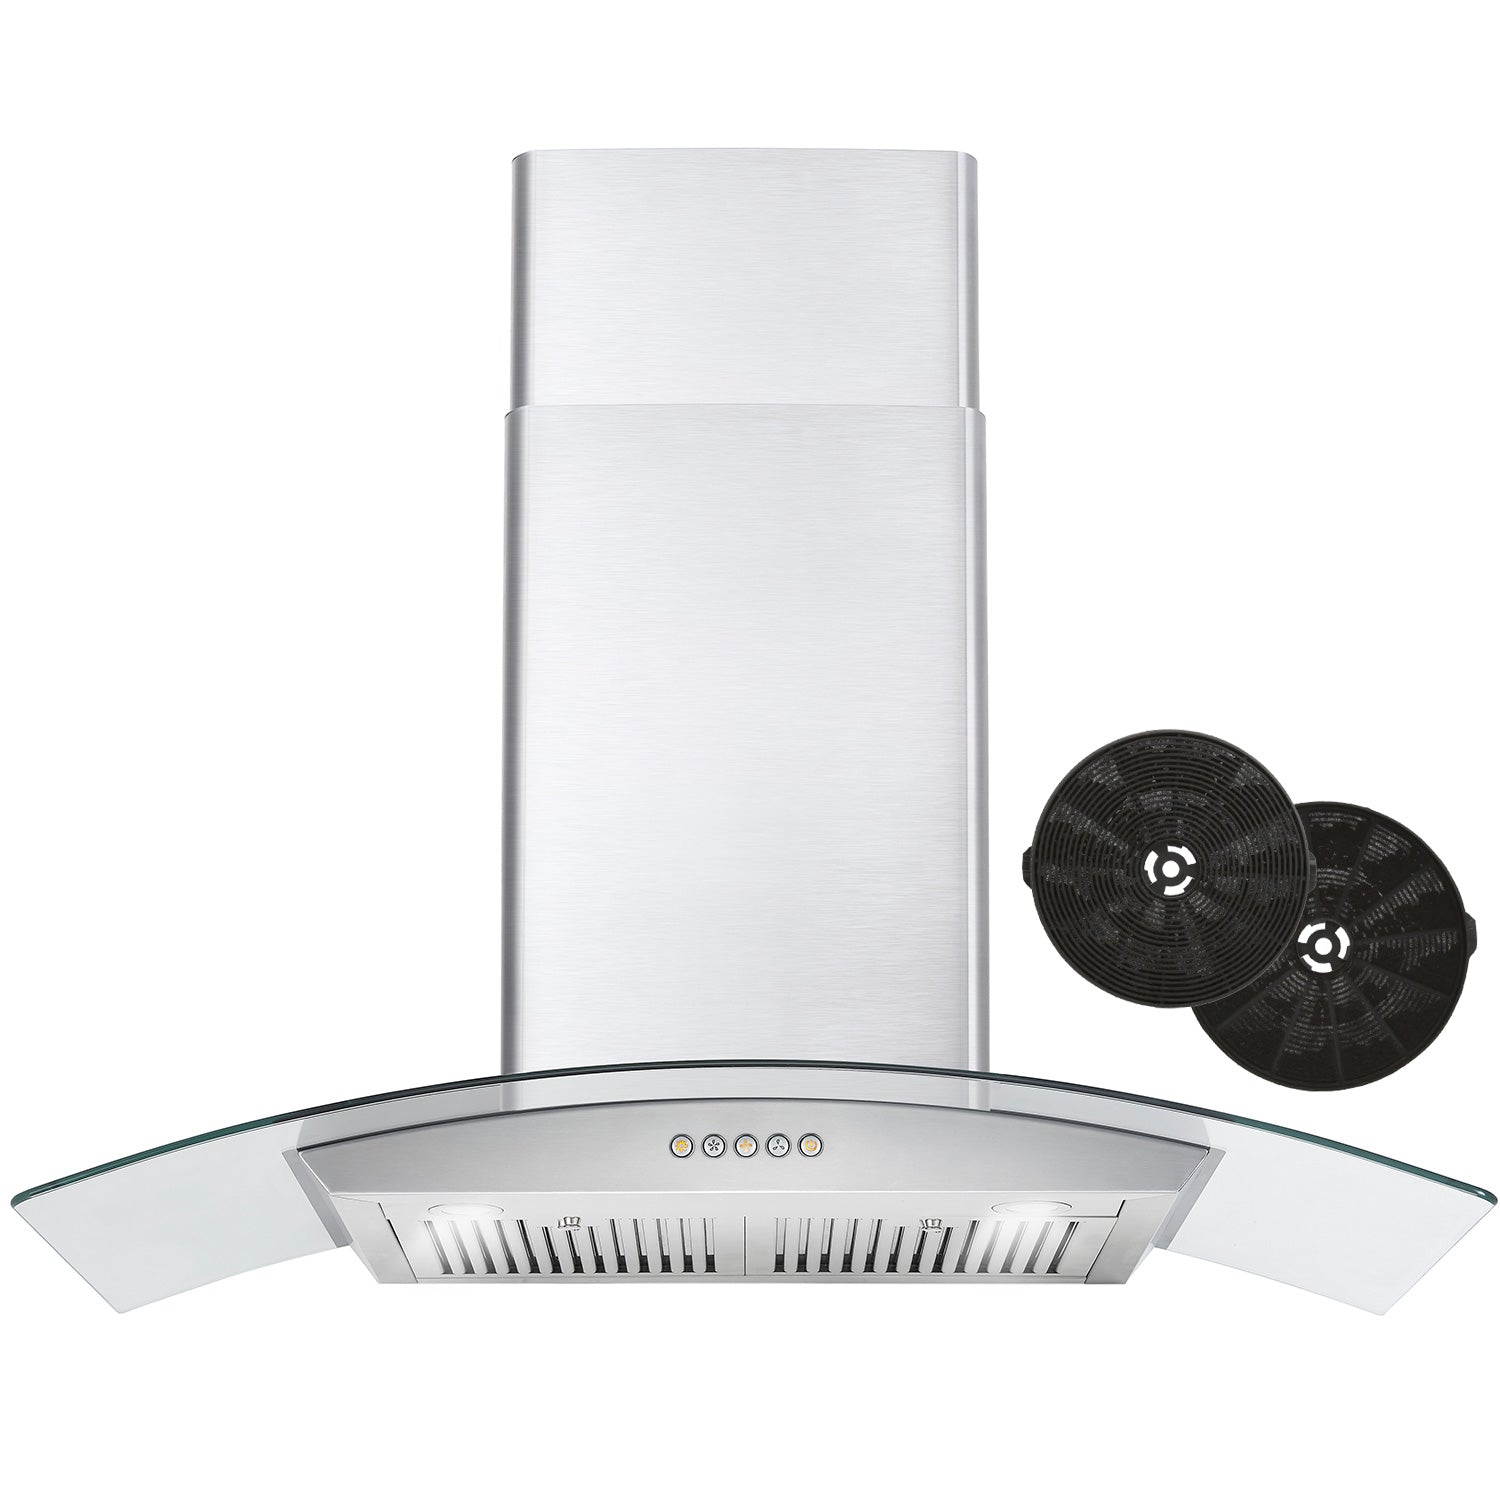 Cosmo - 36 in. Ductless Wall Mount Range Hood in Stainless Steel with LED Lighting and Carbon Filter Kit for Recirculating | COS-668A900-DL